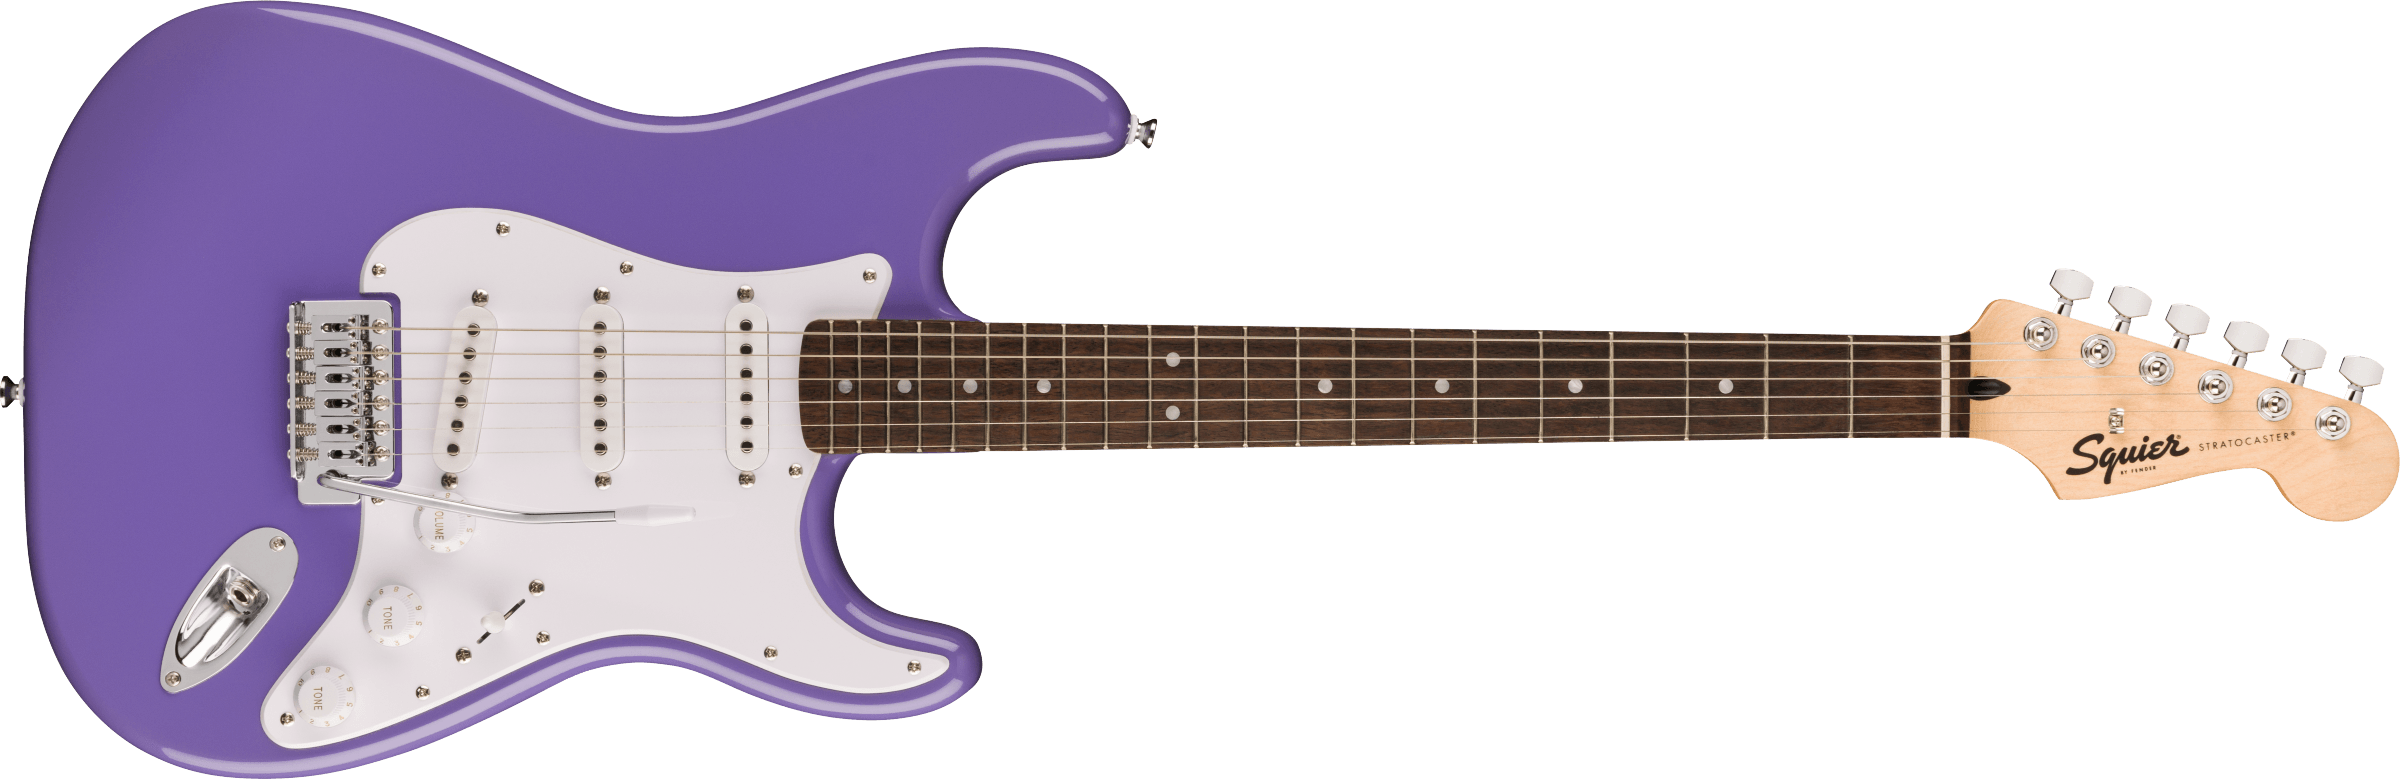 SQUIER - Sonic Stratocaster Ultraviolet